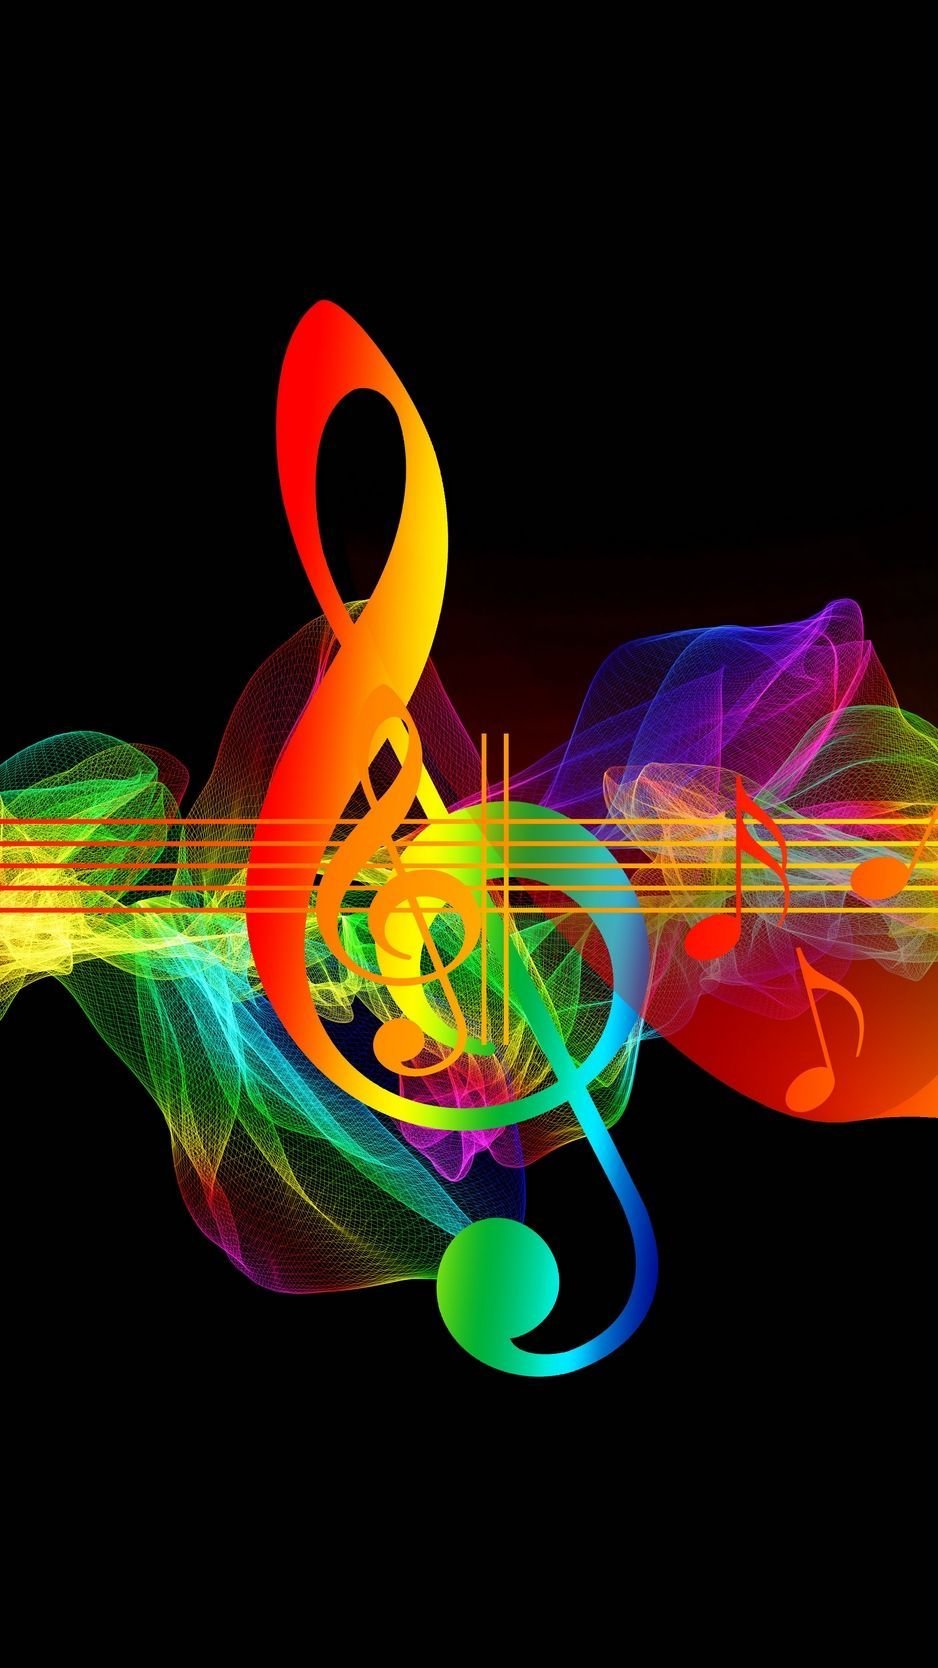 1,000+ HD Music Note Images for Free - Pixabay